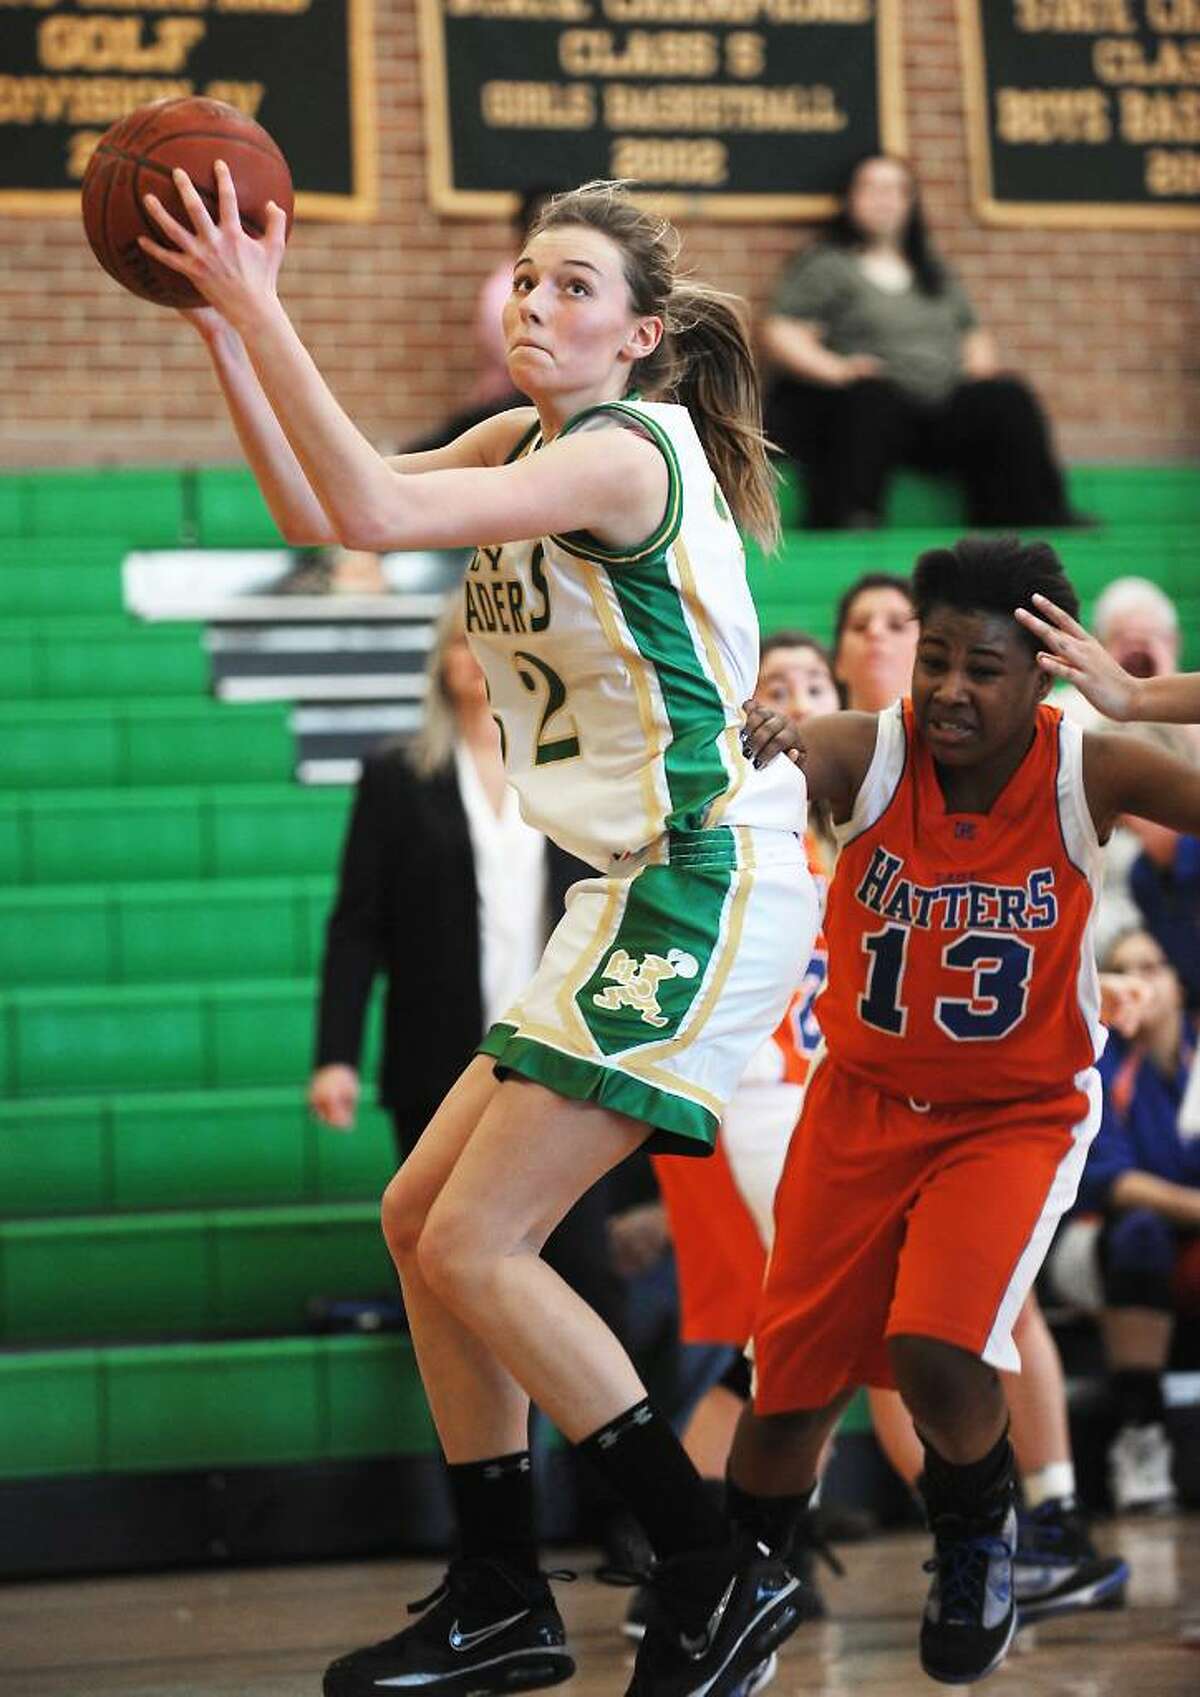 Trinity Catholic's Cayleigh Griffin goes in for a shot against Danbury's Jasmine Holmes in the quarterfinals of the FCIAC girls basketball championship in Stamford, Conn. on Saturday, Feb. 20, 2010.